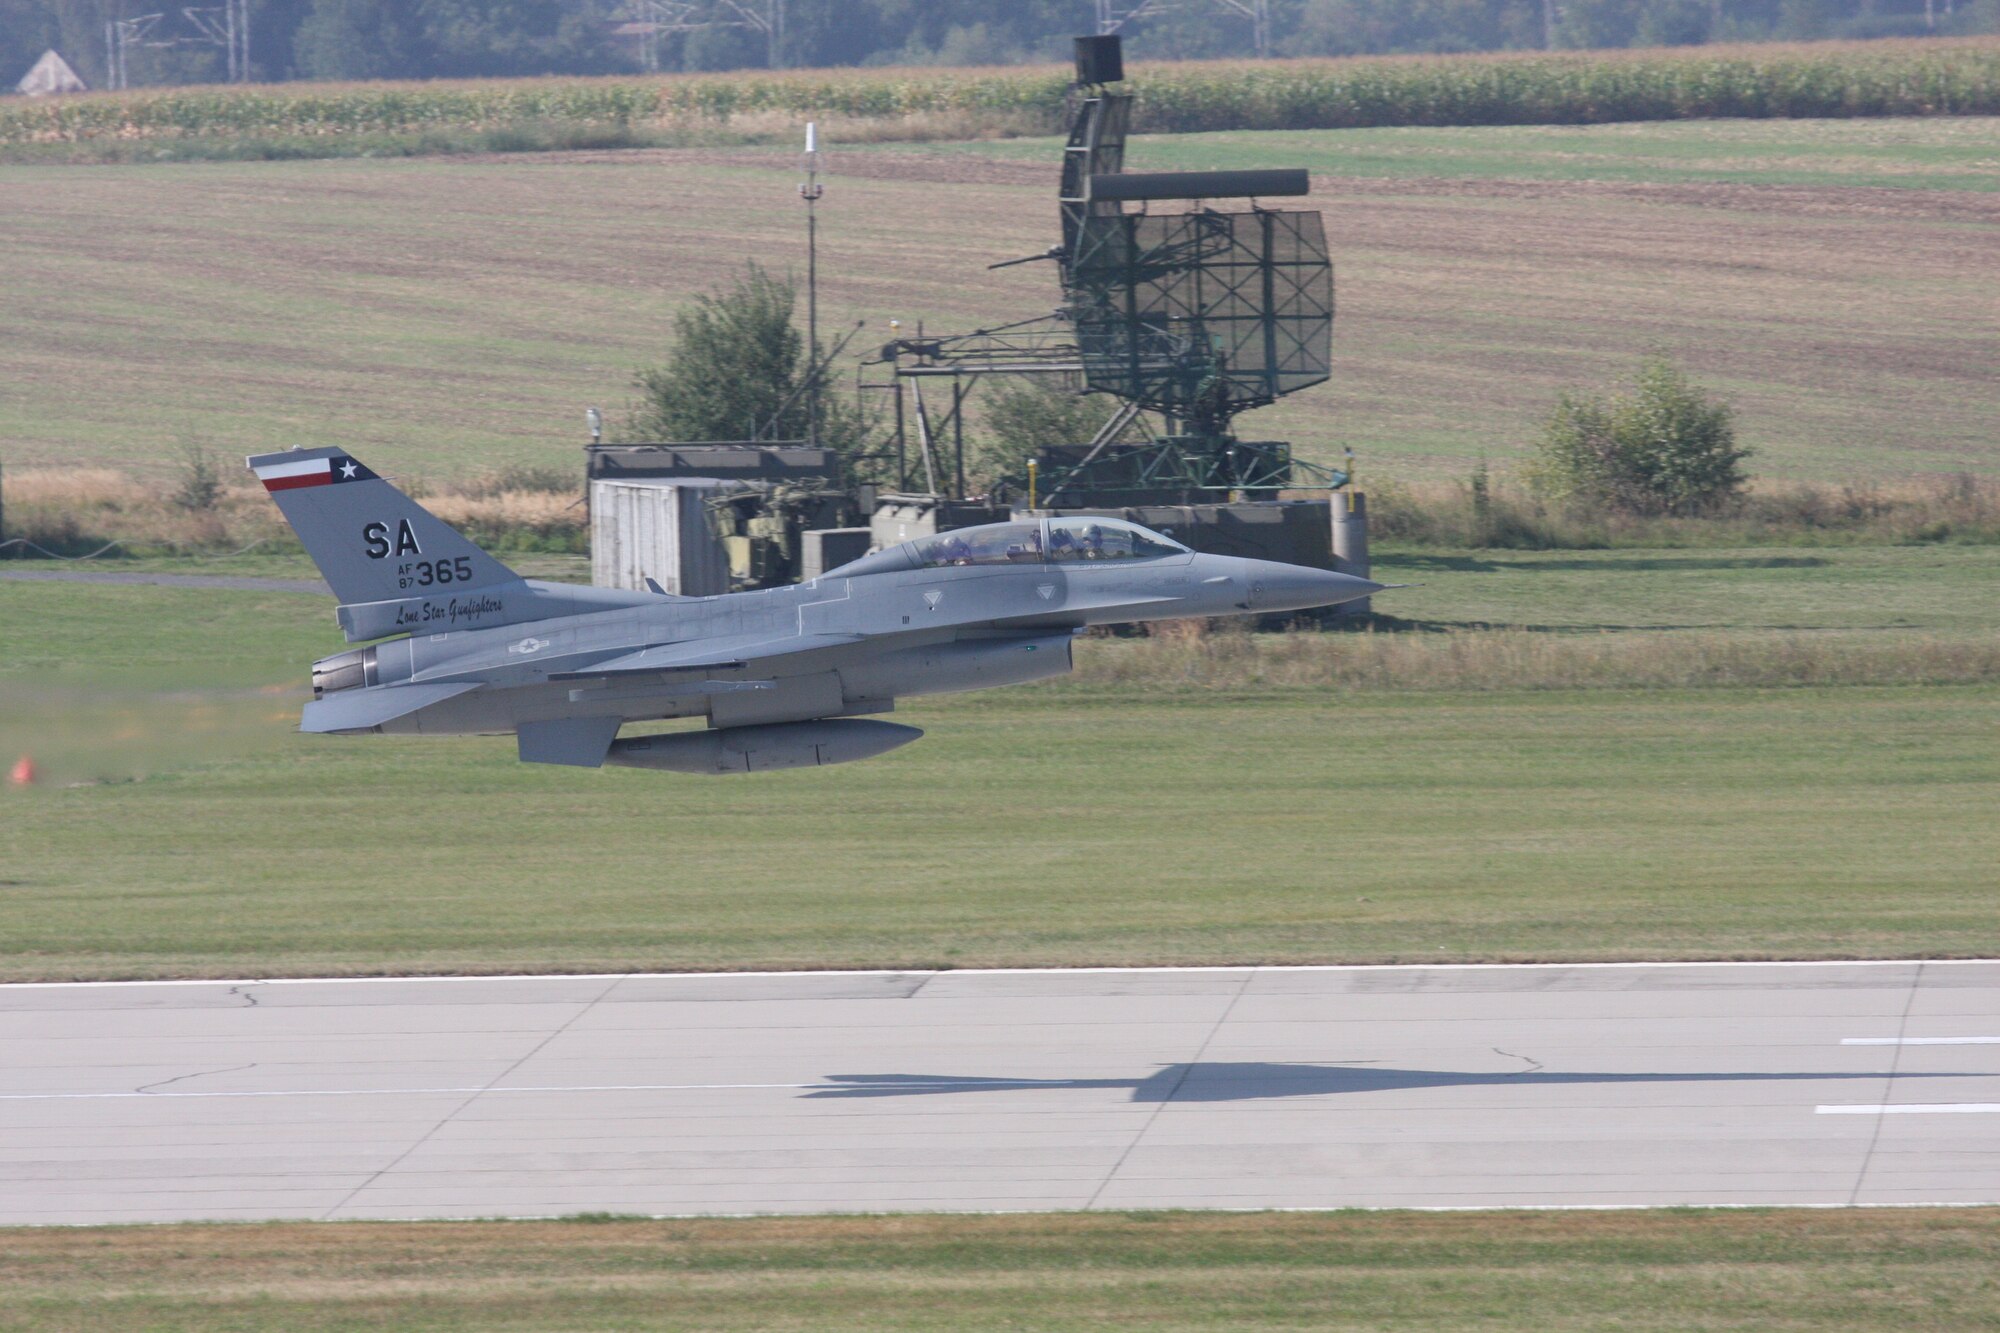 An F-16 takes off at Caslav Air Base.  Members of the Texas Air National Guard’s 149th Fighter Wing were in the Czech Republic conducting mutual training as part of the National Guard’s state partnership program.  (U.S. Air Force photo by Senior Master Sgt Miguel Arellano)